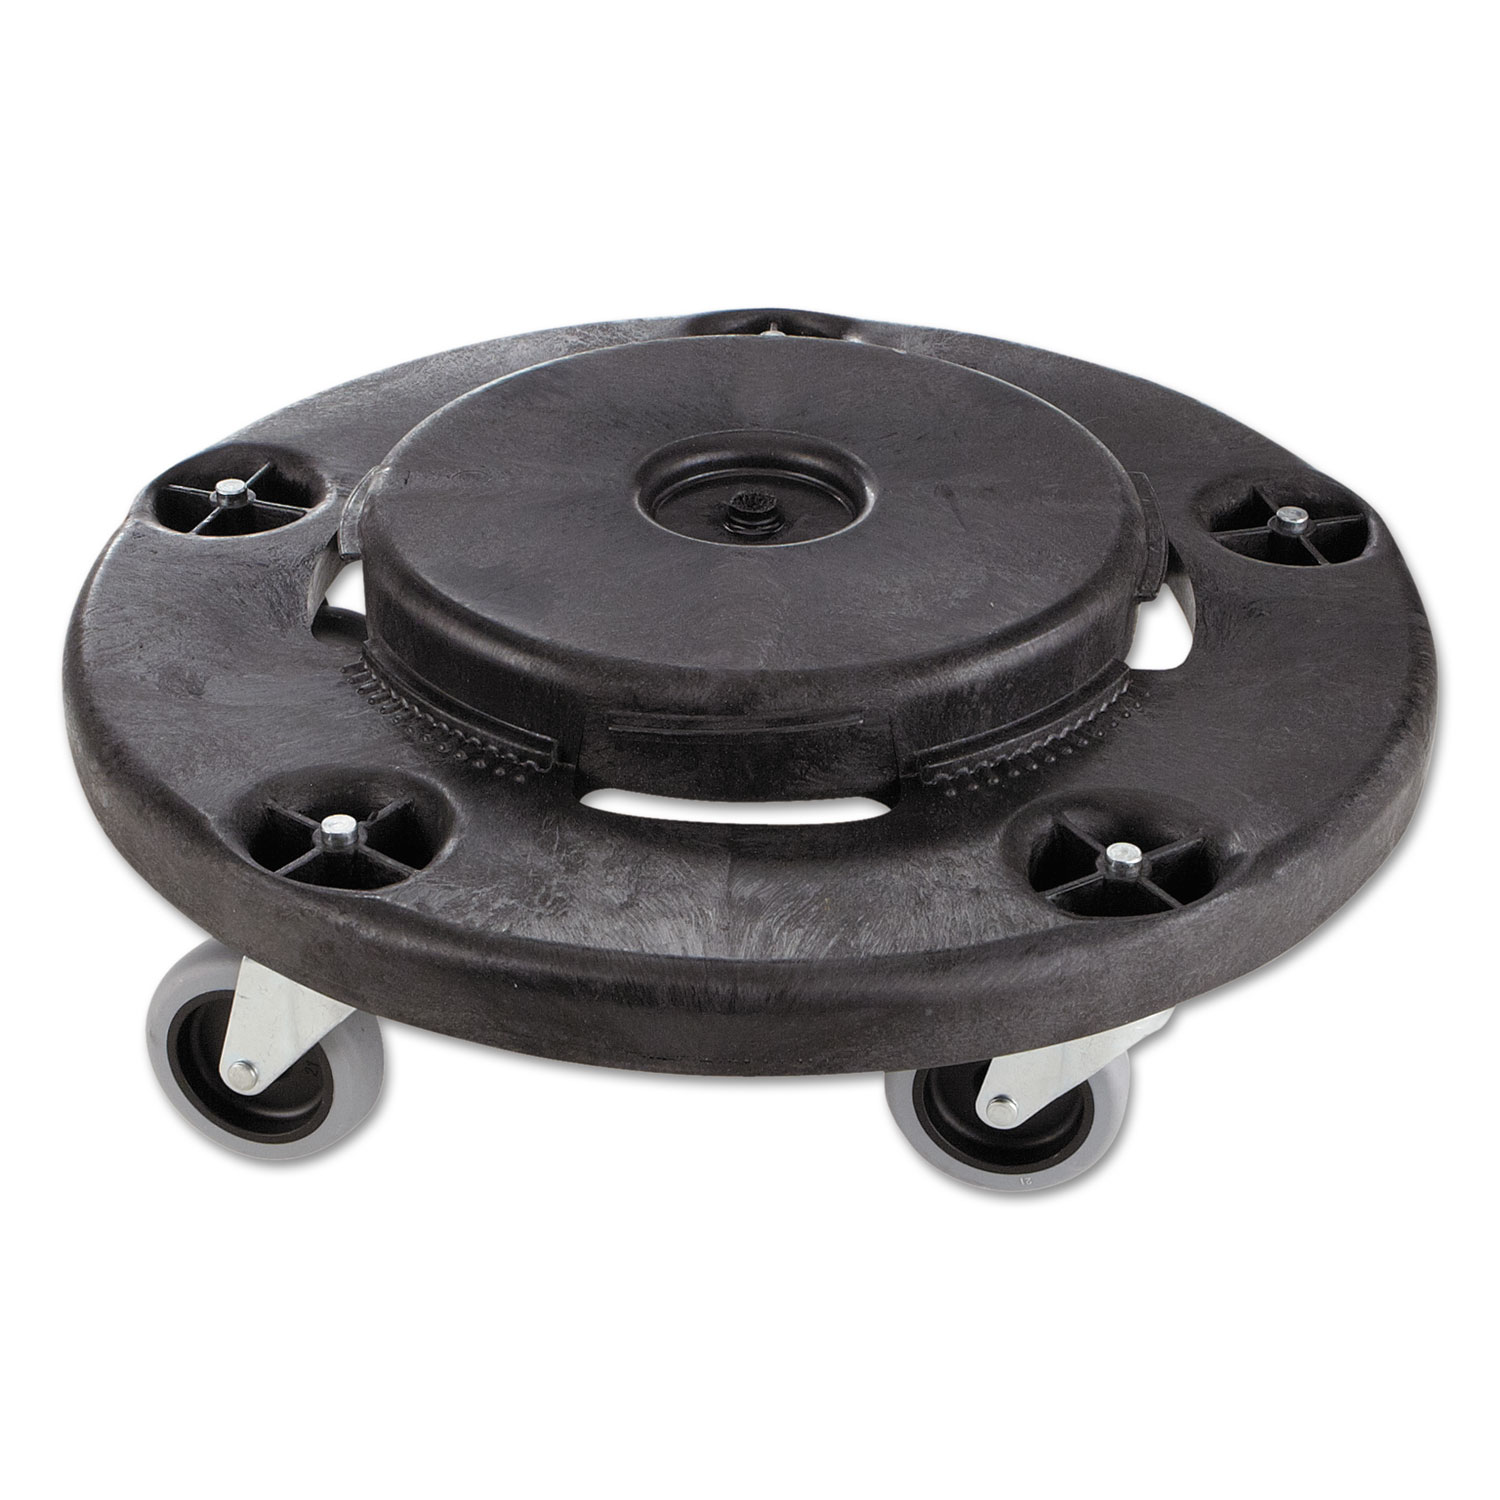 Brute Round Twist On/Off Dolly, 250 lb Capacity, 18" dia x 6.63"h, Fits 20-55 Gallon BRUTE Containers, Black